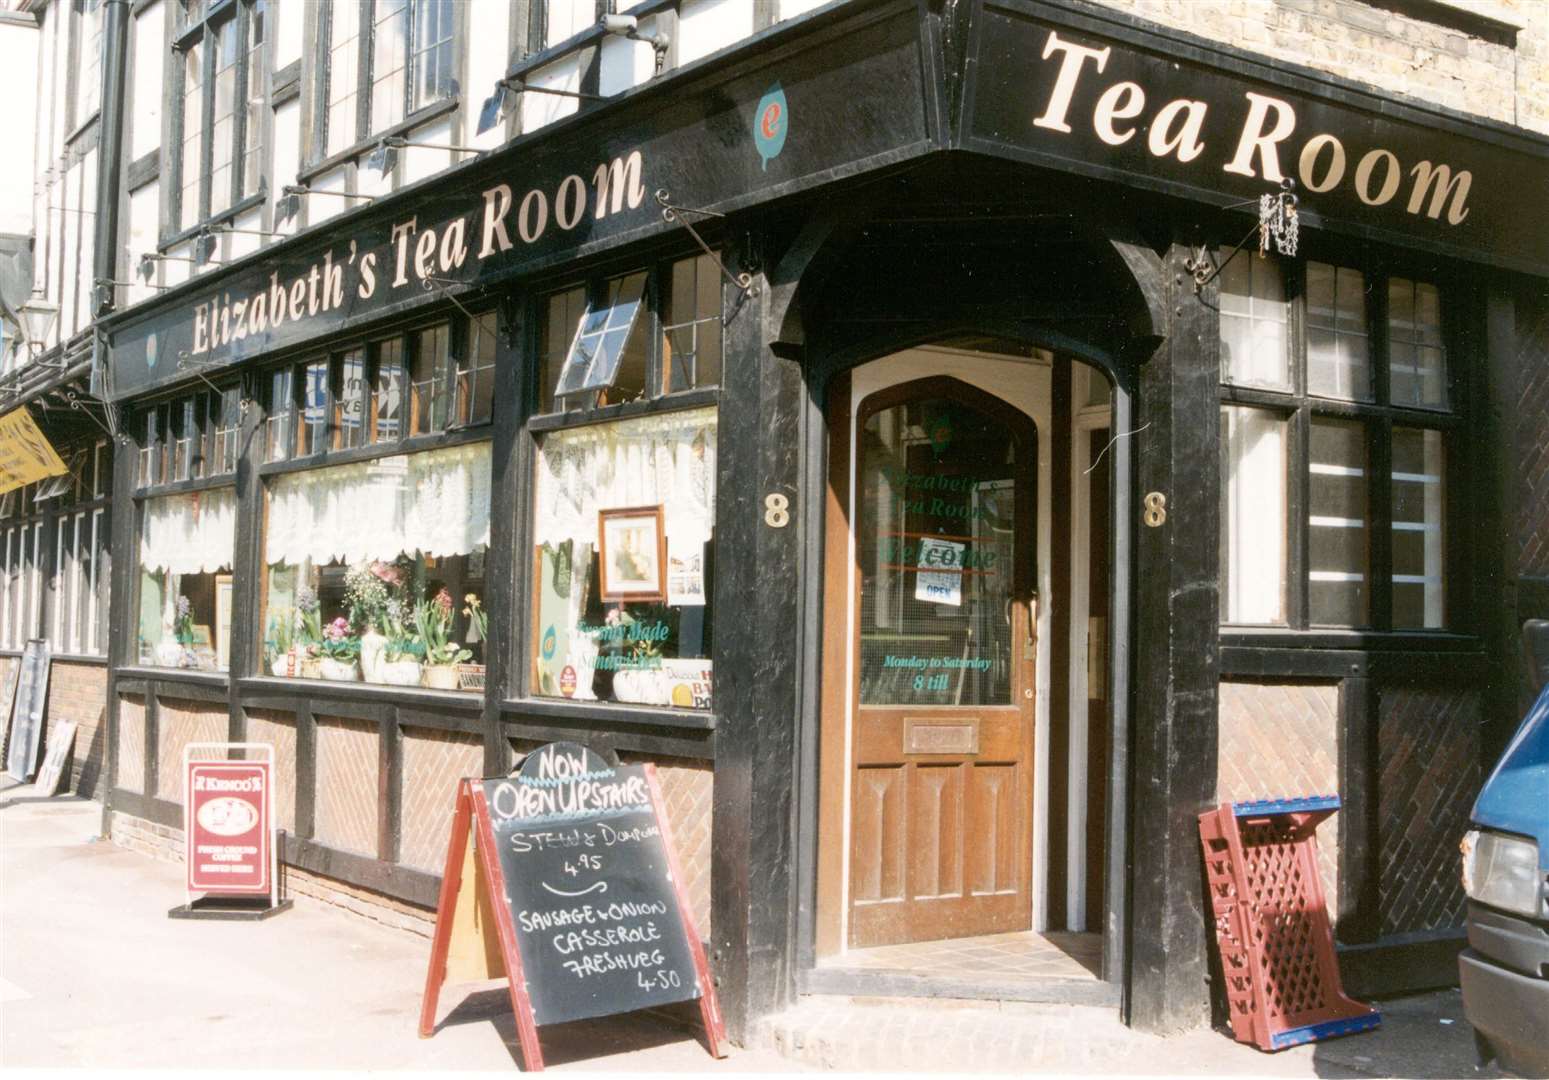 Elizabeth's Tea Room in Maidstone - where Nick Leeson's wife Lisa worked following his arrest for bringing down Barings Bank in one of the decade's most sensational financial collapses